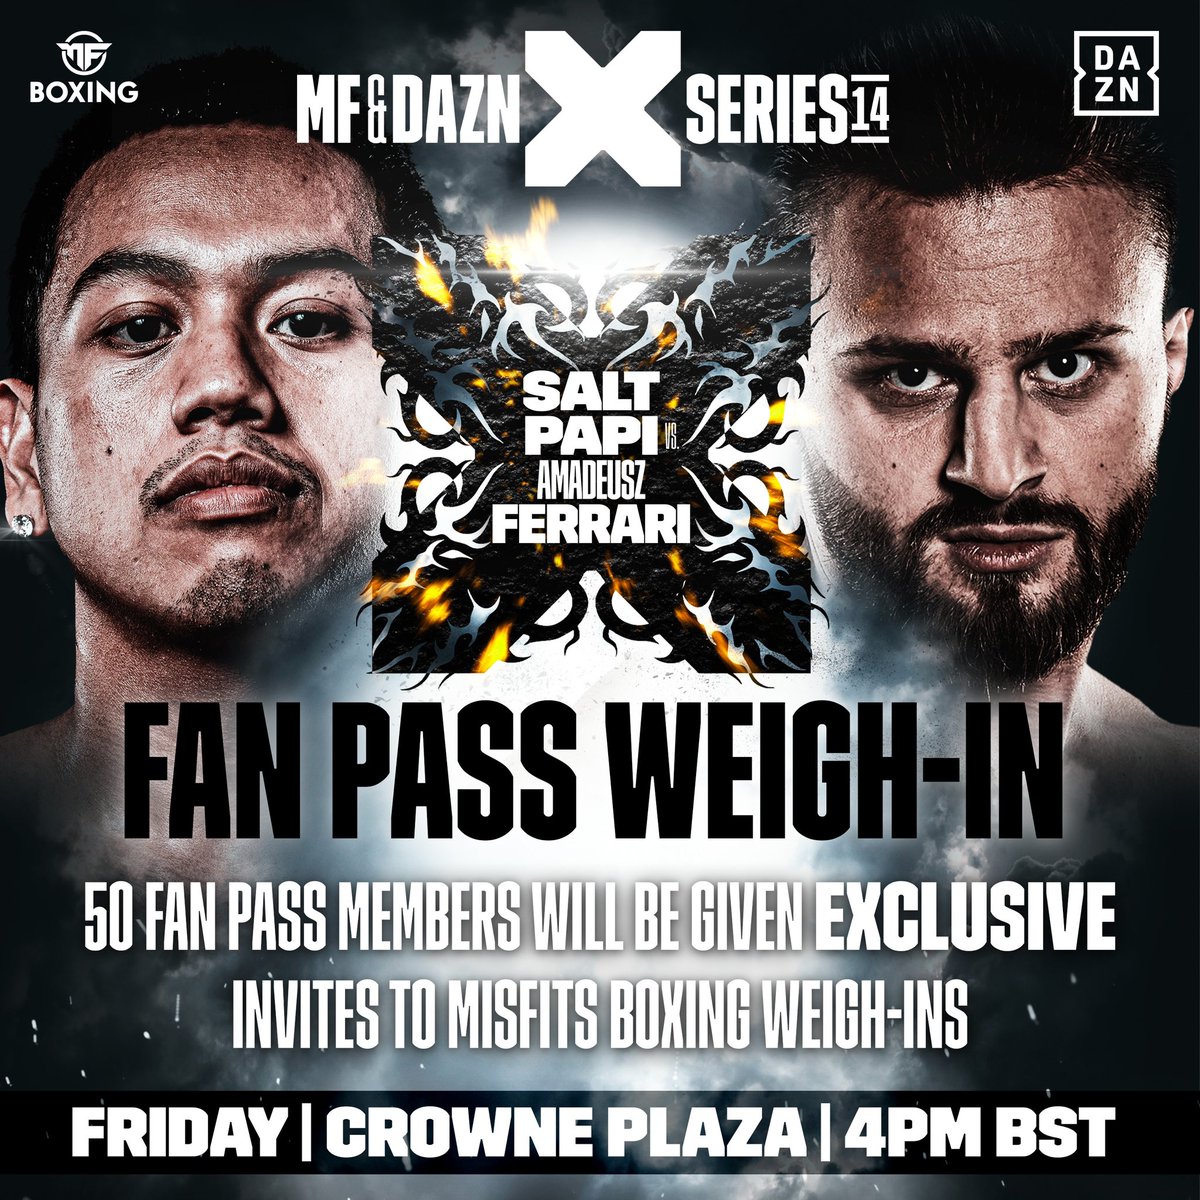 We’re giving only FIFTY fan pass holders the chance to catch the action FIRST HAND at tomorrow’s weigh in ⚖️ Sign up here to be in with a chance ⬇️ misfitsprioritypass.fan3.io